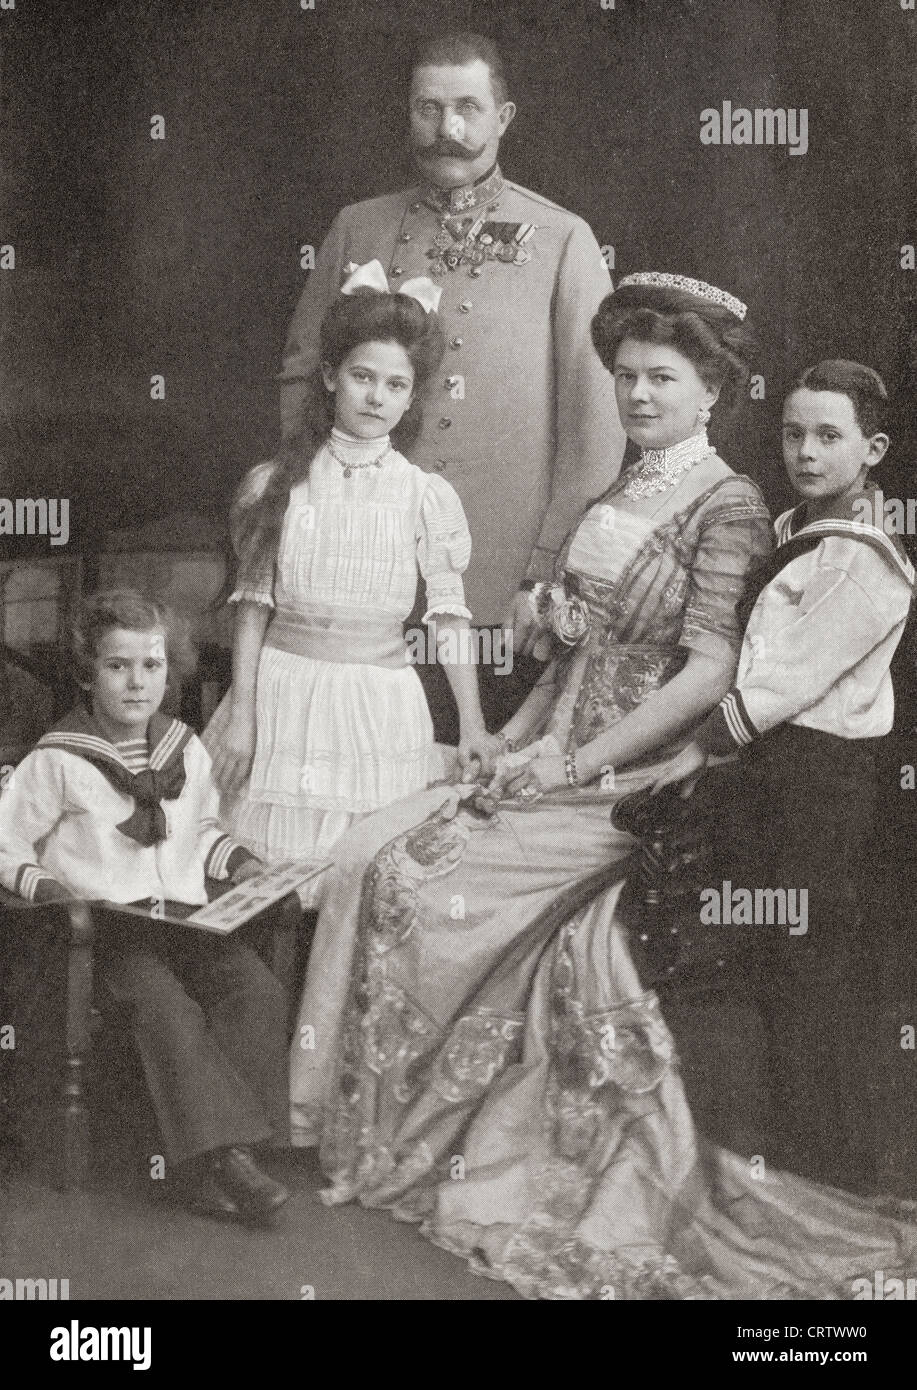 Franz Ferdinand, 1863 – 1914. Archduke of Austria-Este, Austro-Hungarian and Royal Prince of Hungary and of Bohemia, with family Stock Photo